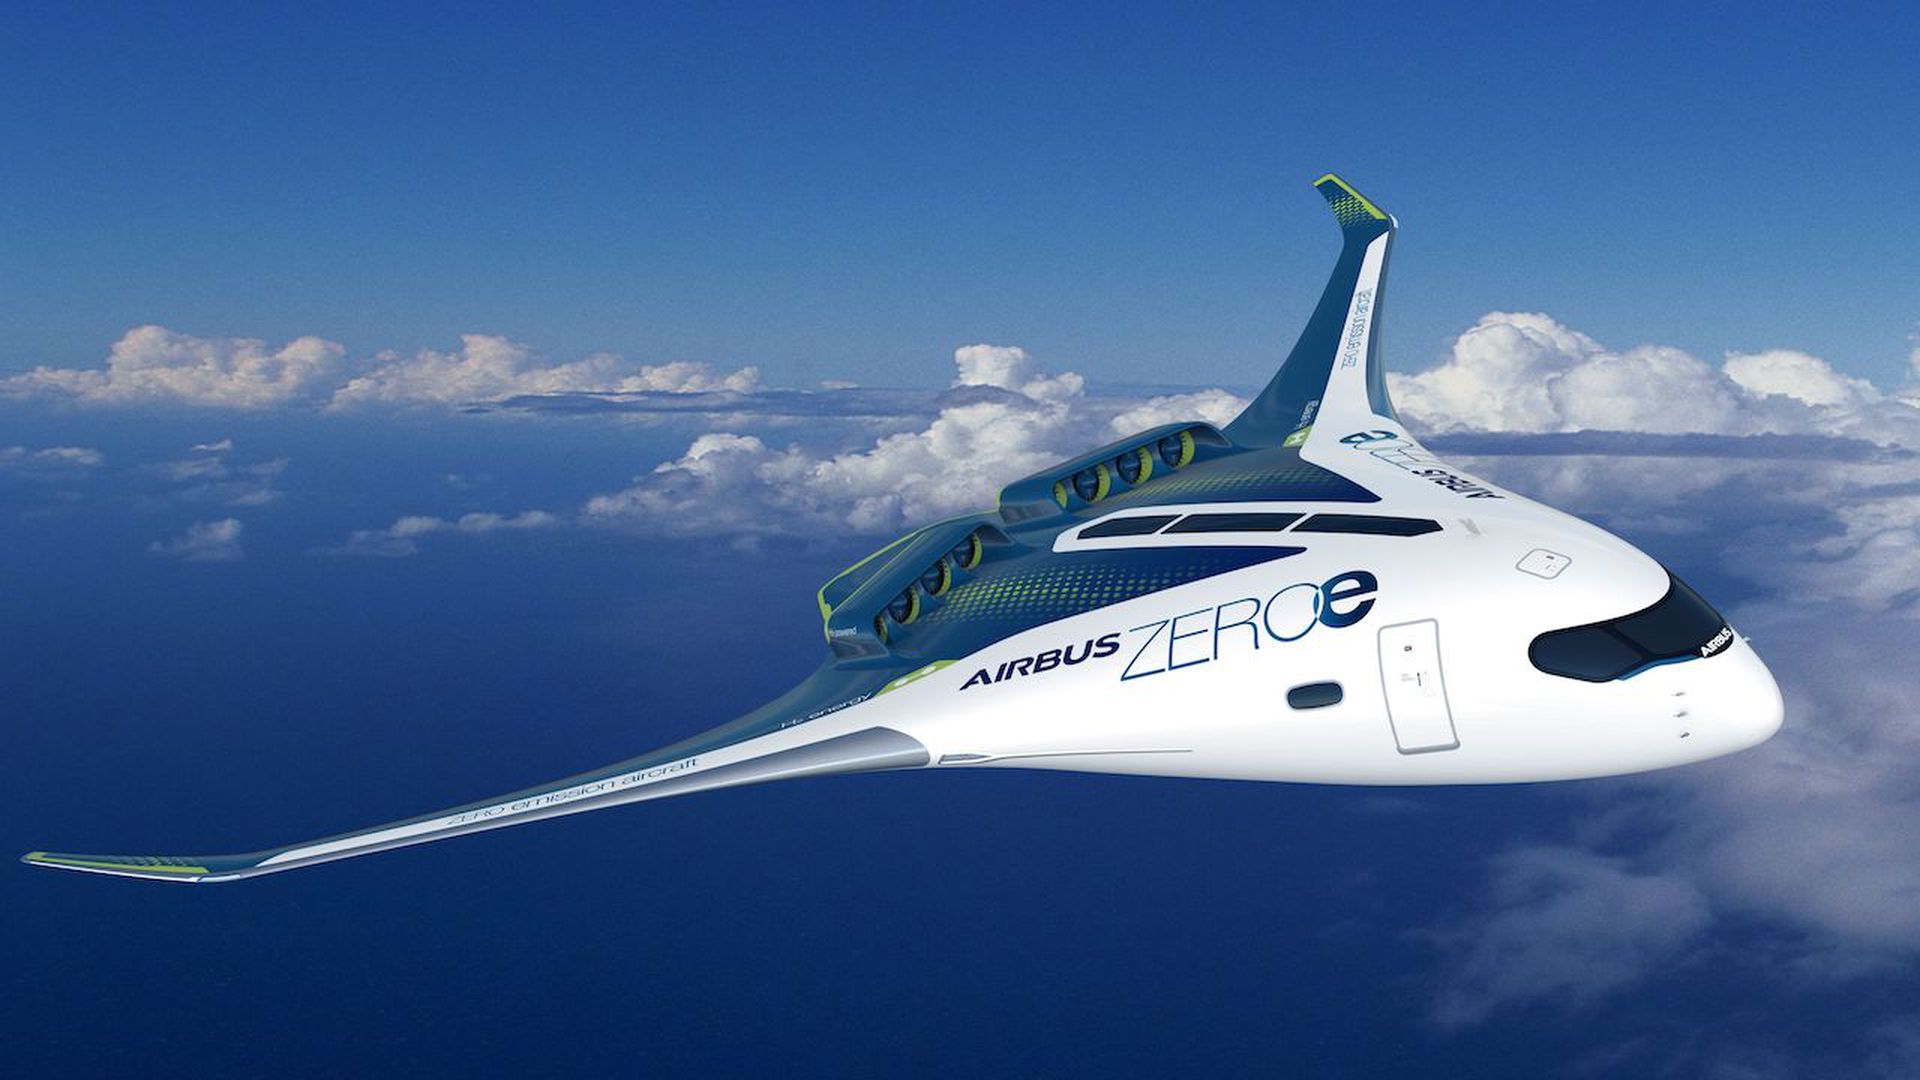 Illustration of Airbus' “blended-wing body” zero-emissions plane. Courtesy of Airbus